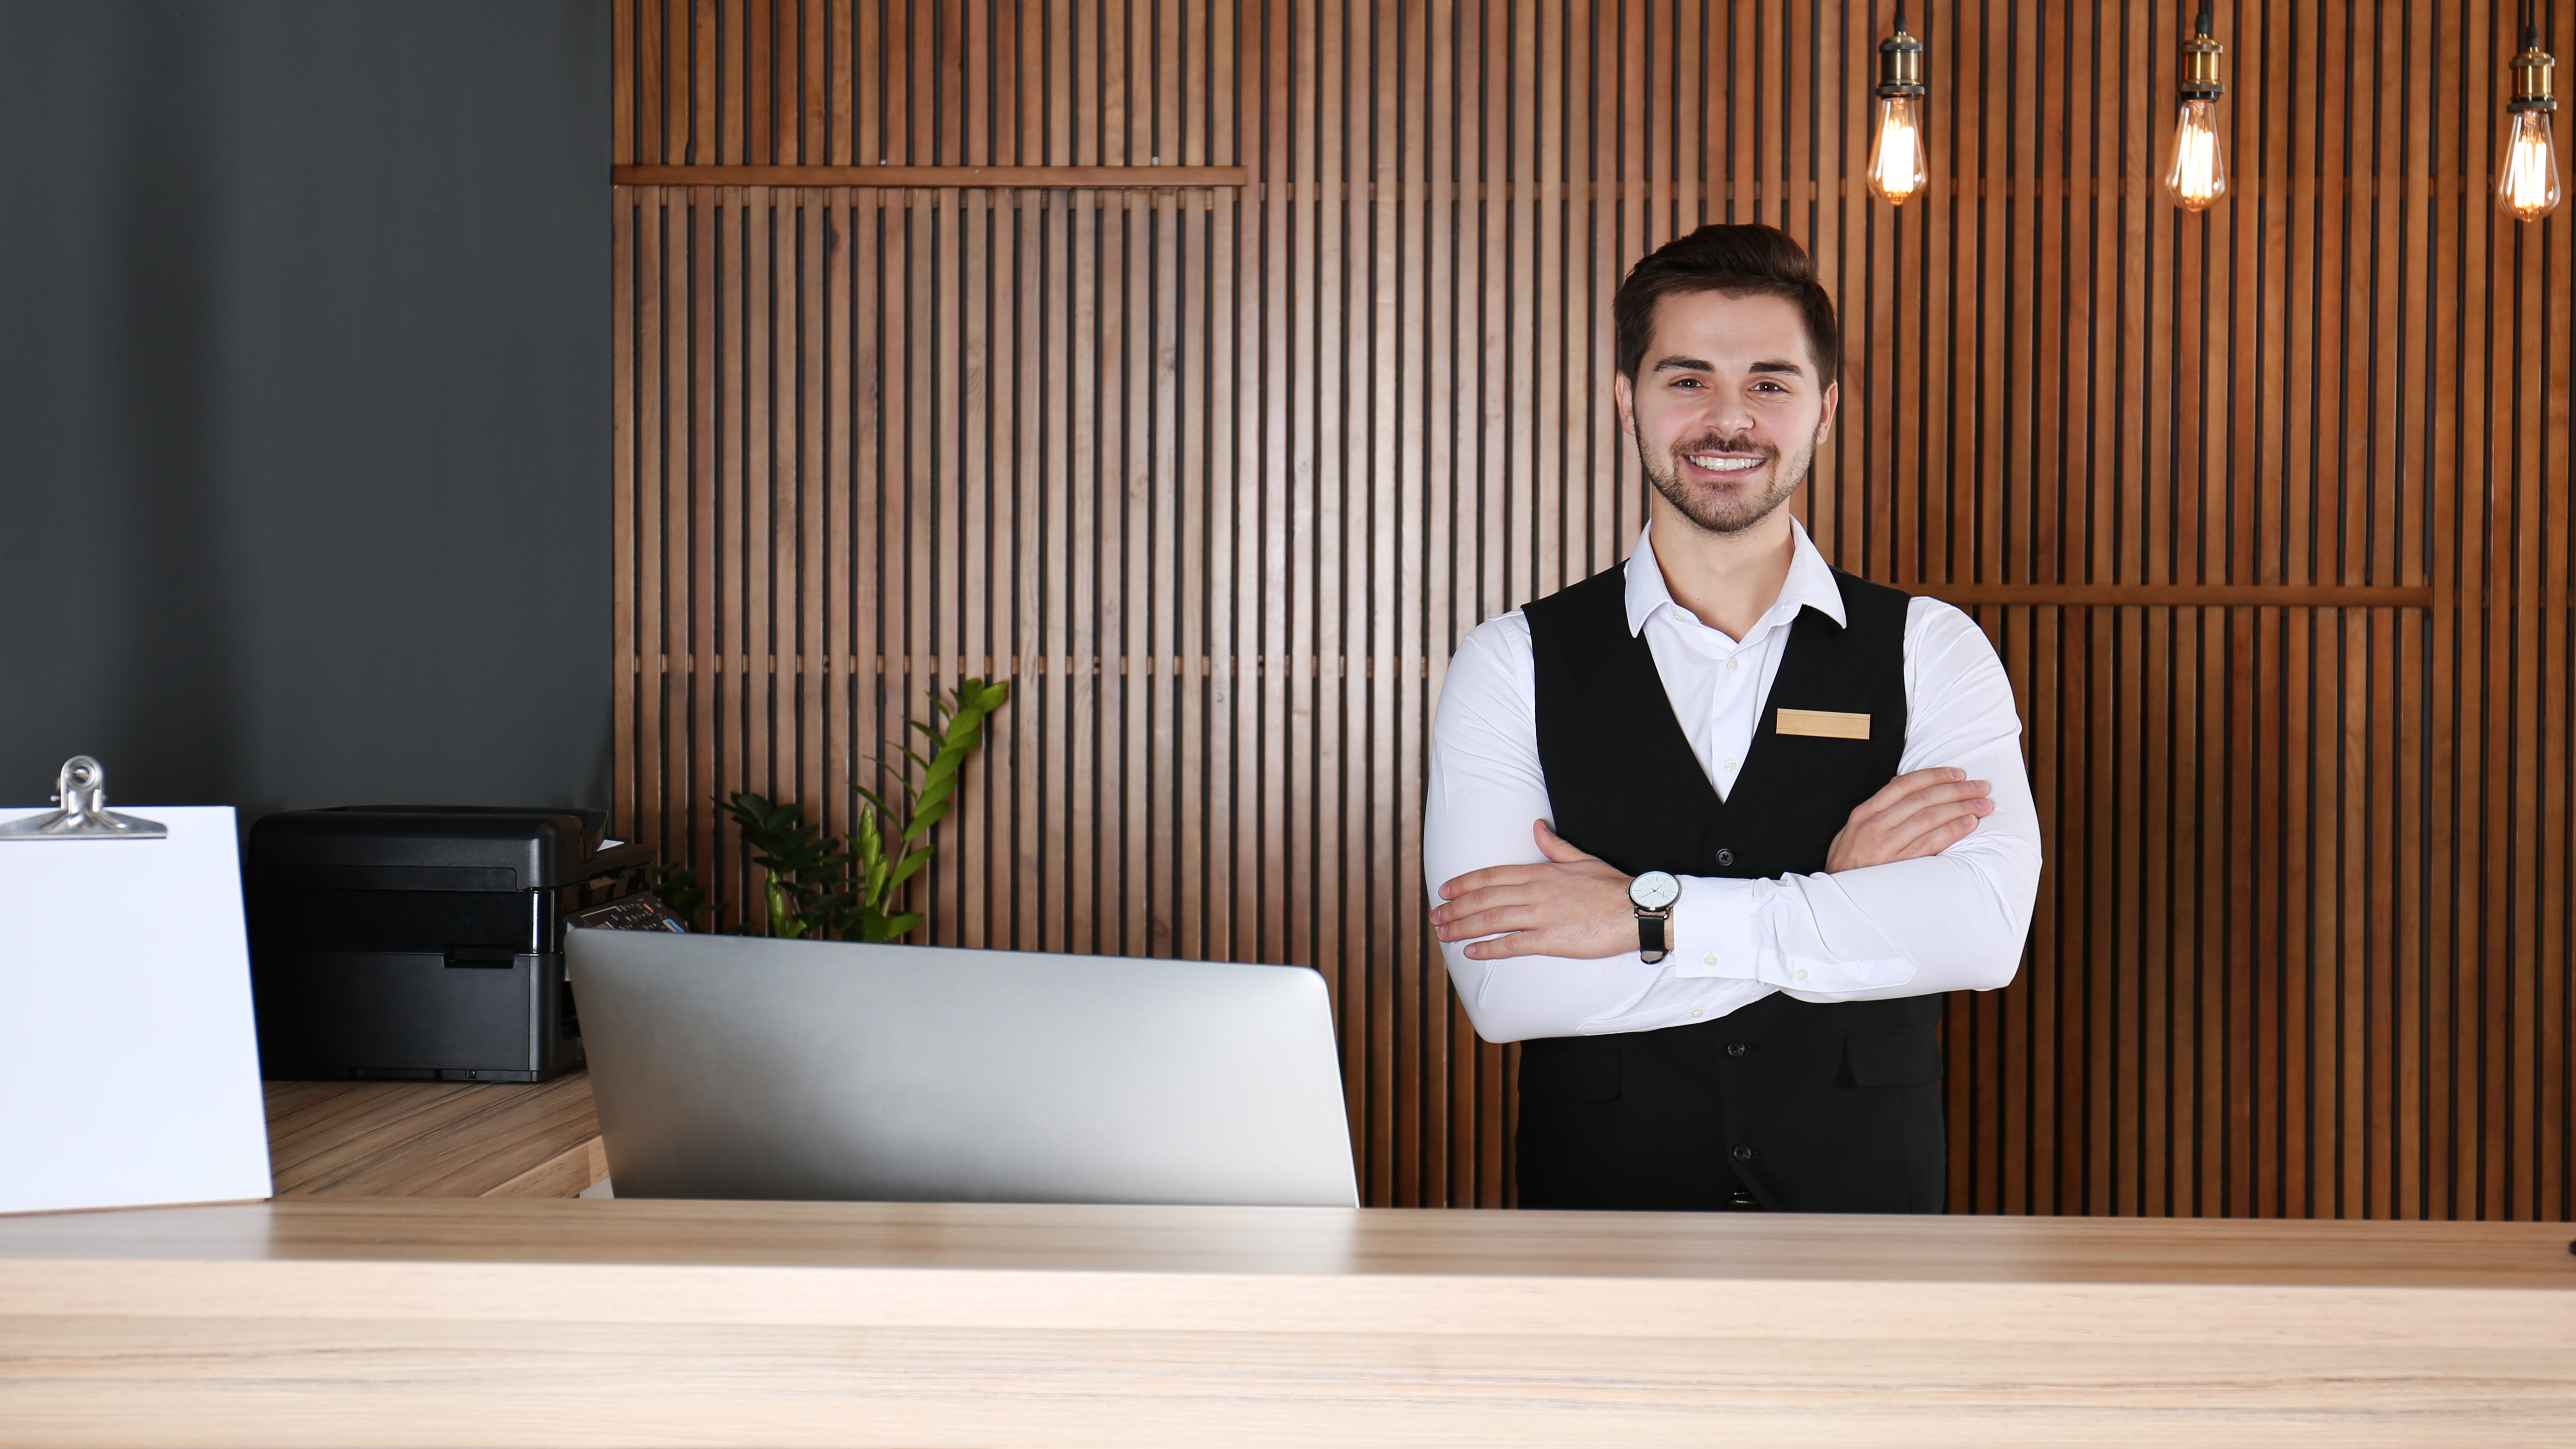 Bringing hotel-style service to real estate